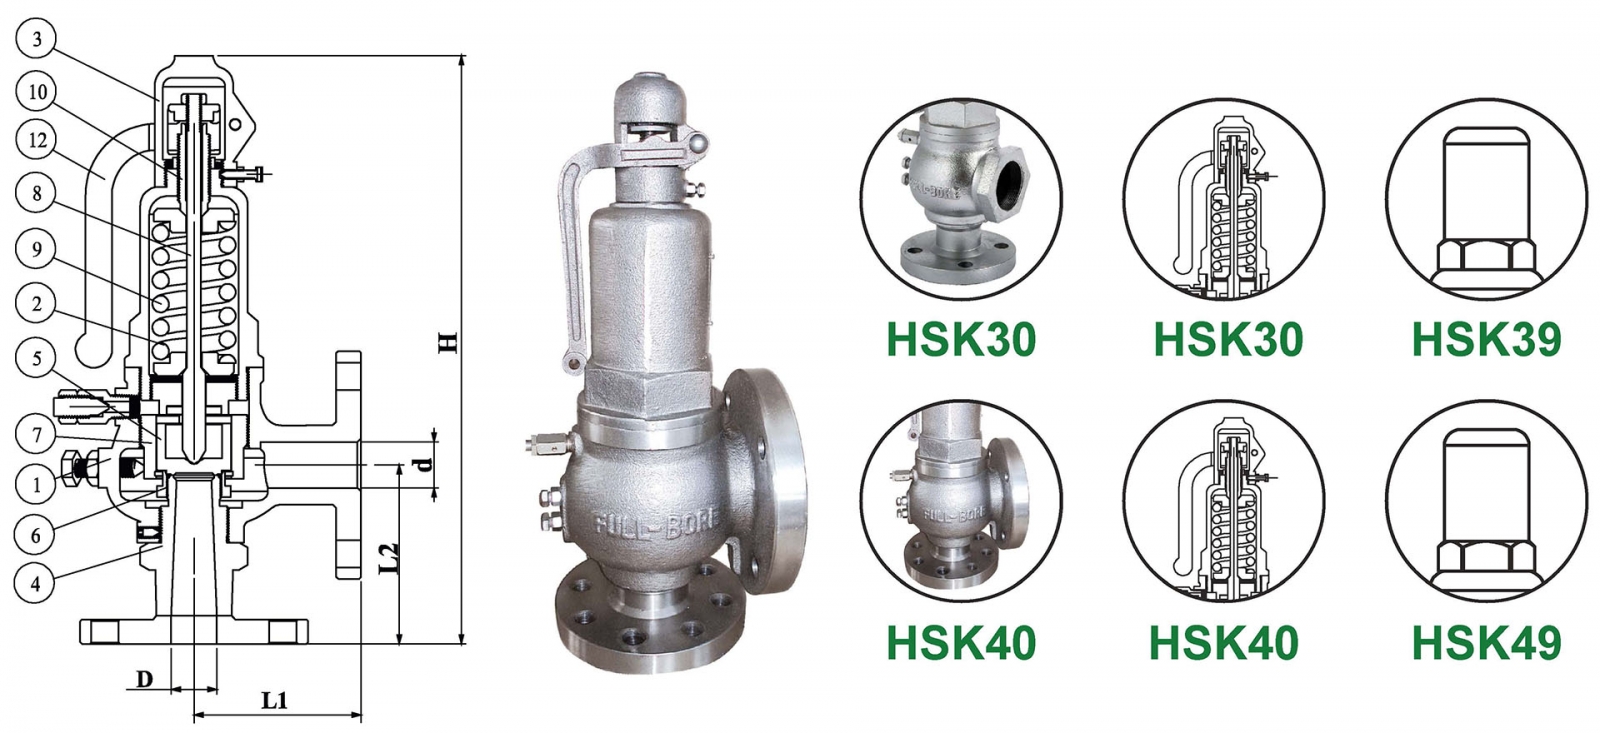 Hants design types and disc material selections of full bore safety valve